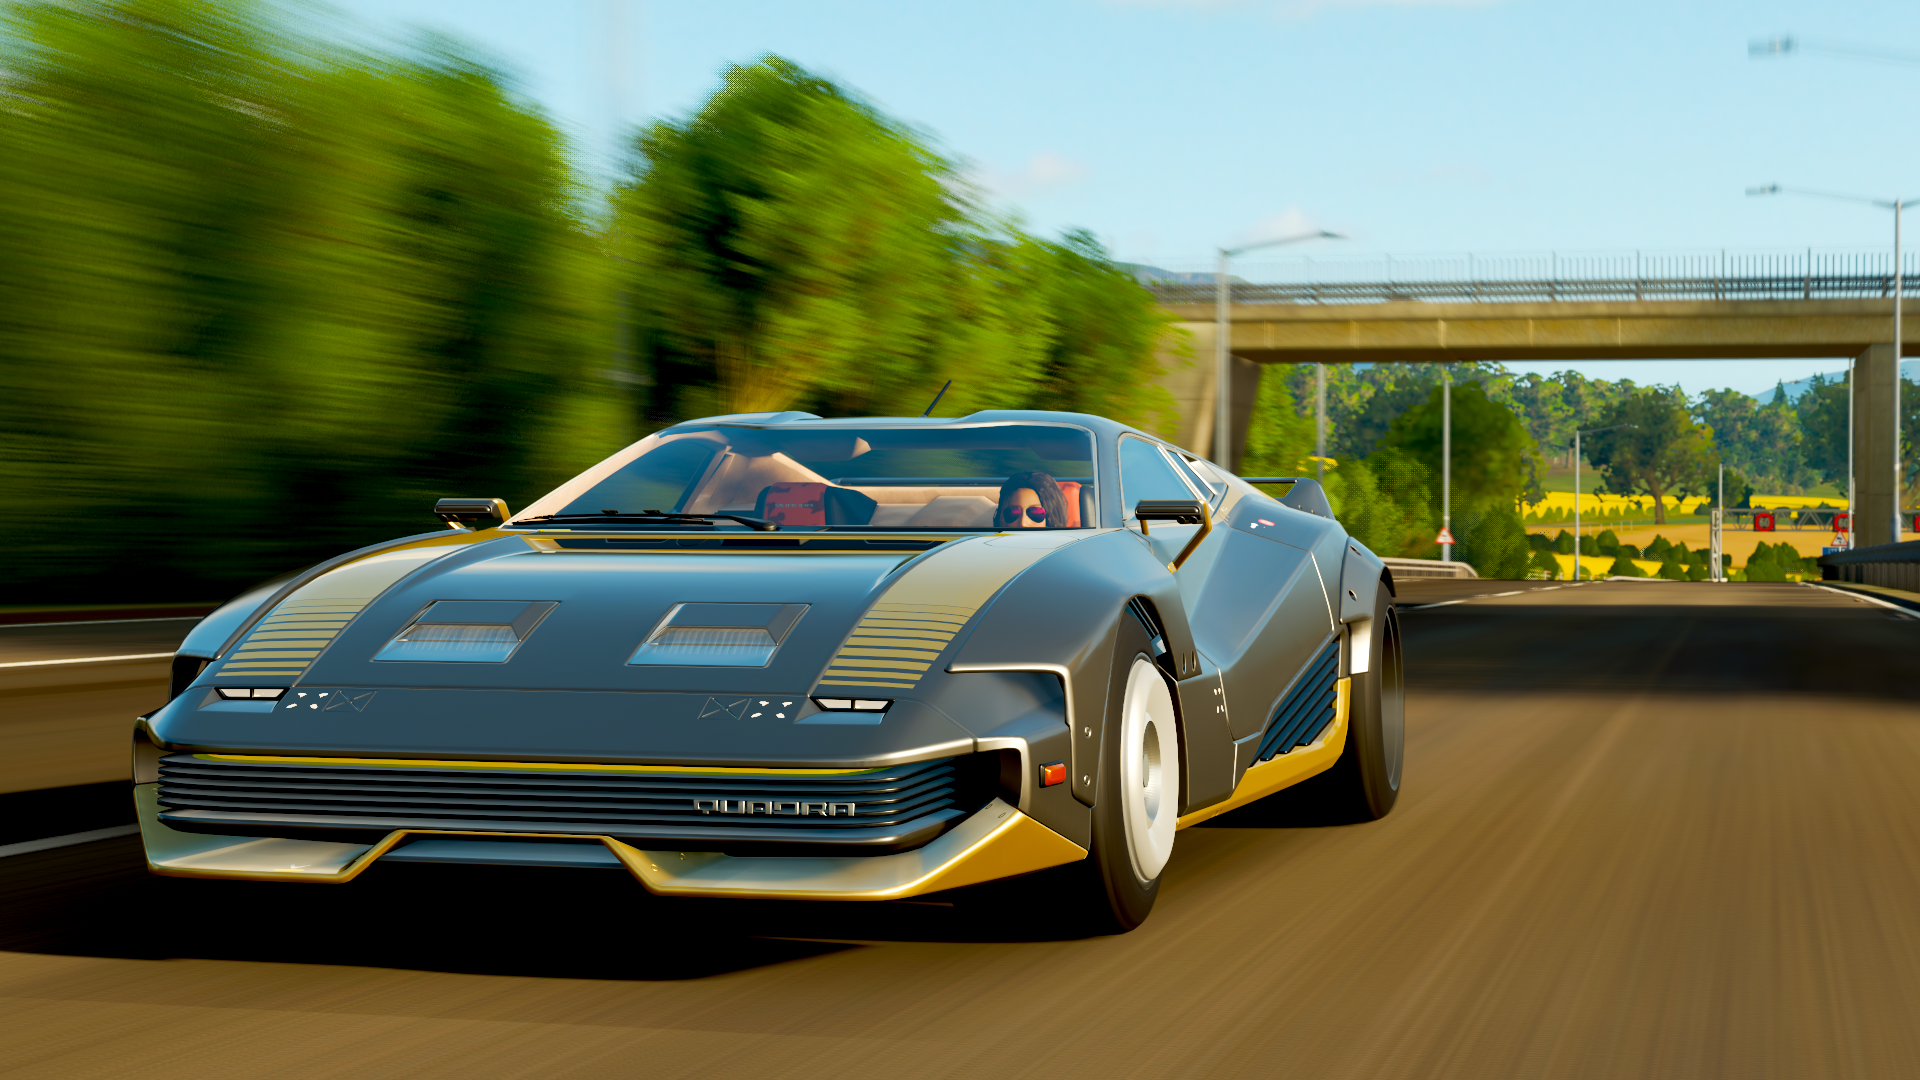 Image for The Cyberpunk 2077 car is now in Forza Horizon 4